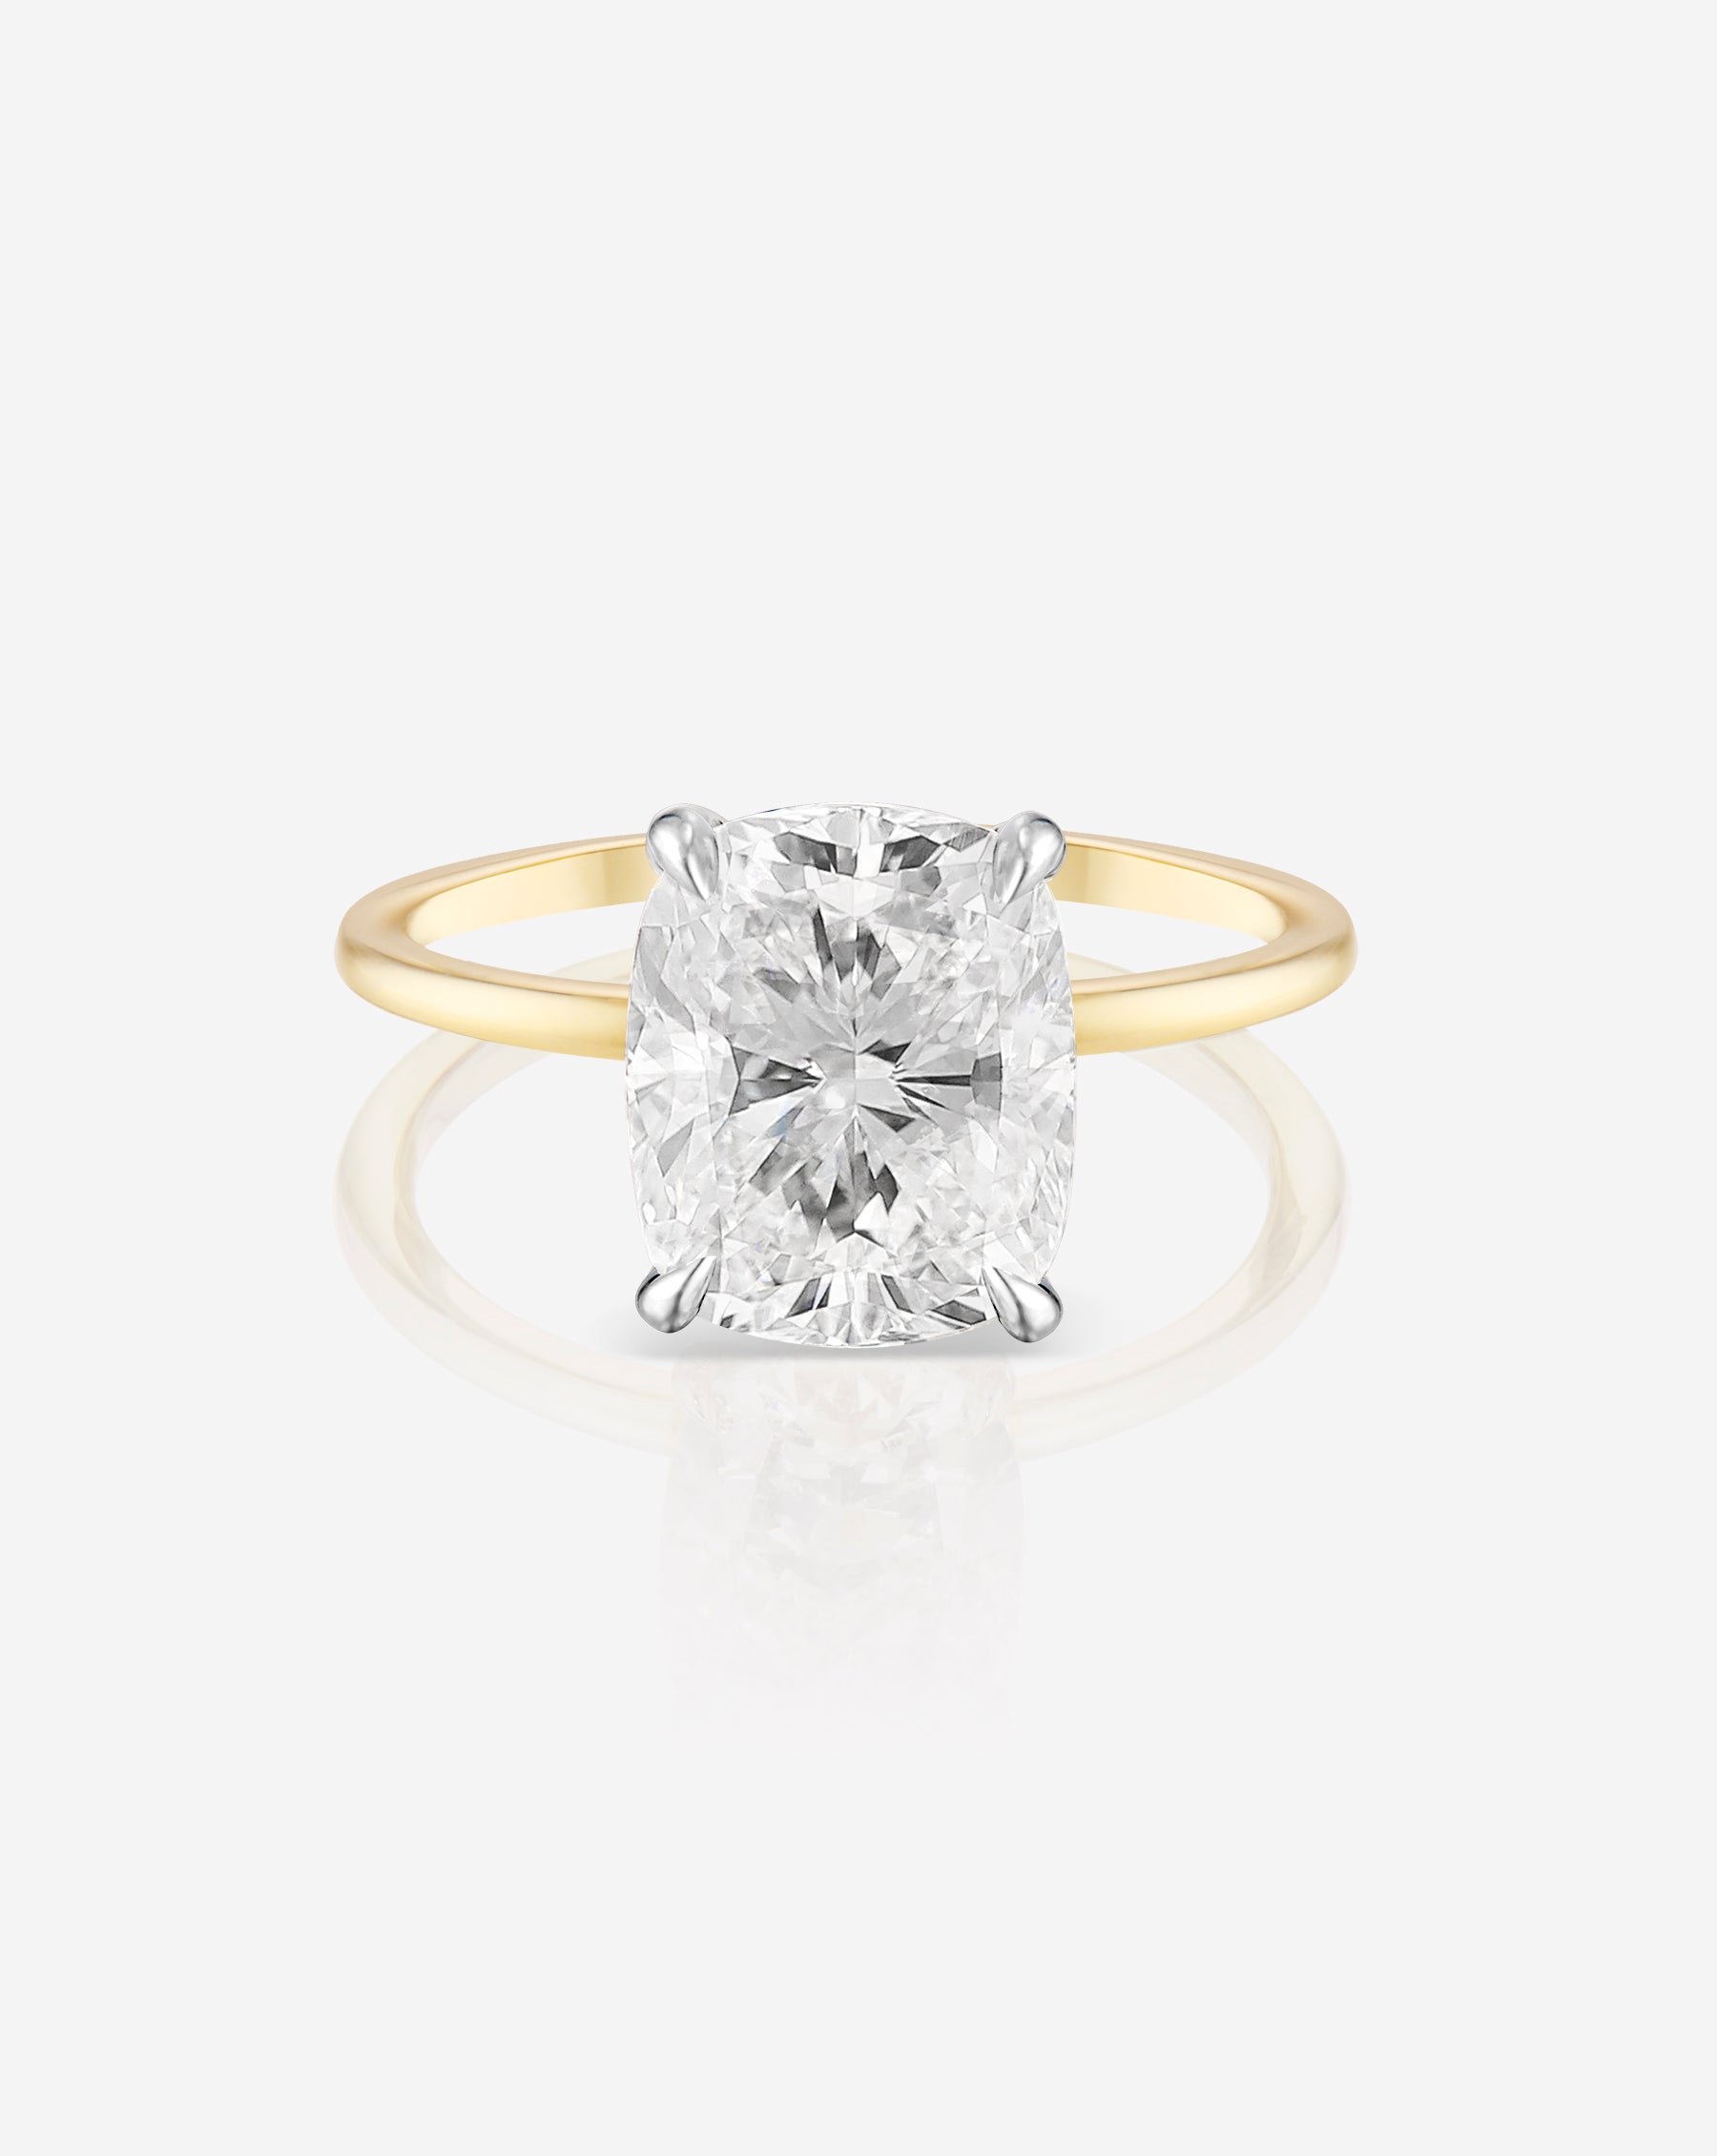 3.31 Cushion Brilliant in the Whisper Thin®  Lab Grown Diamond Ring 14K Yellow Gold with Platinum Prongs